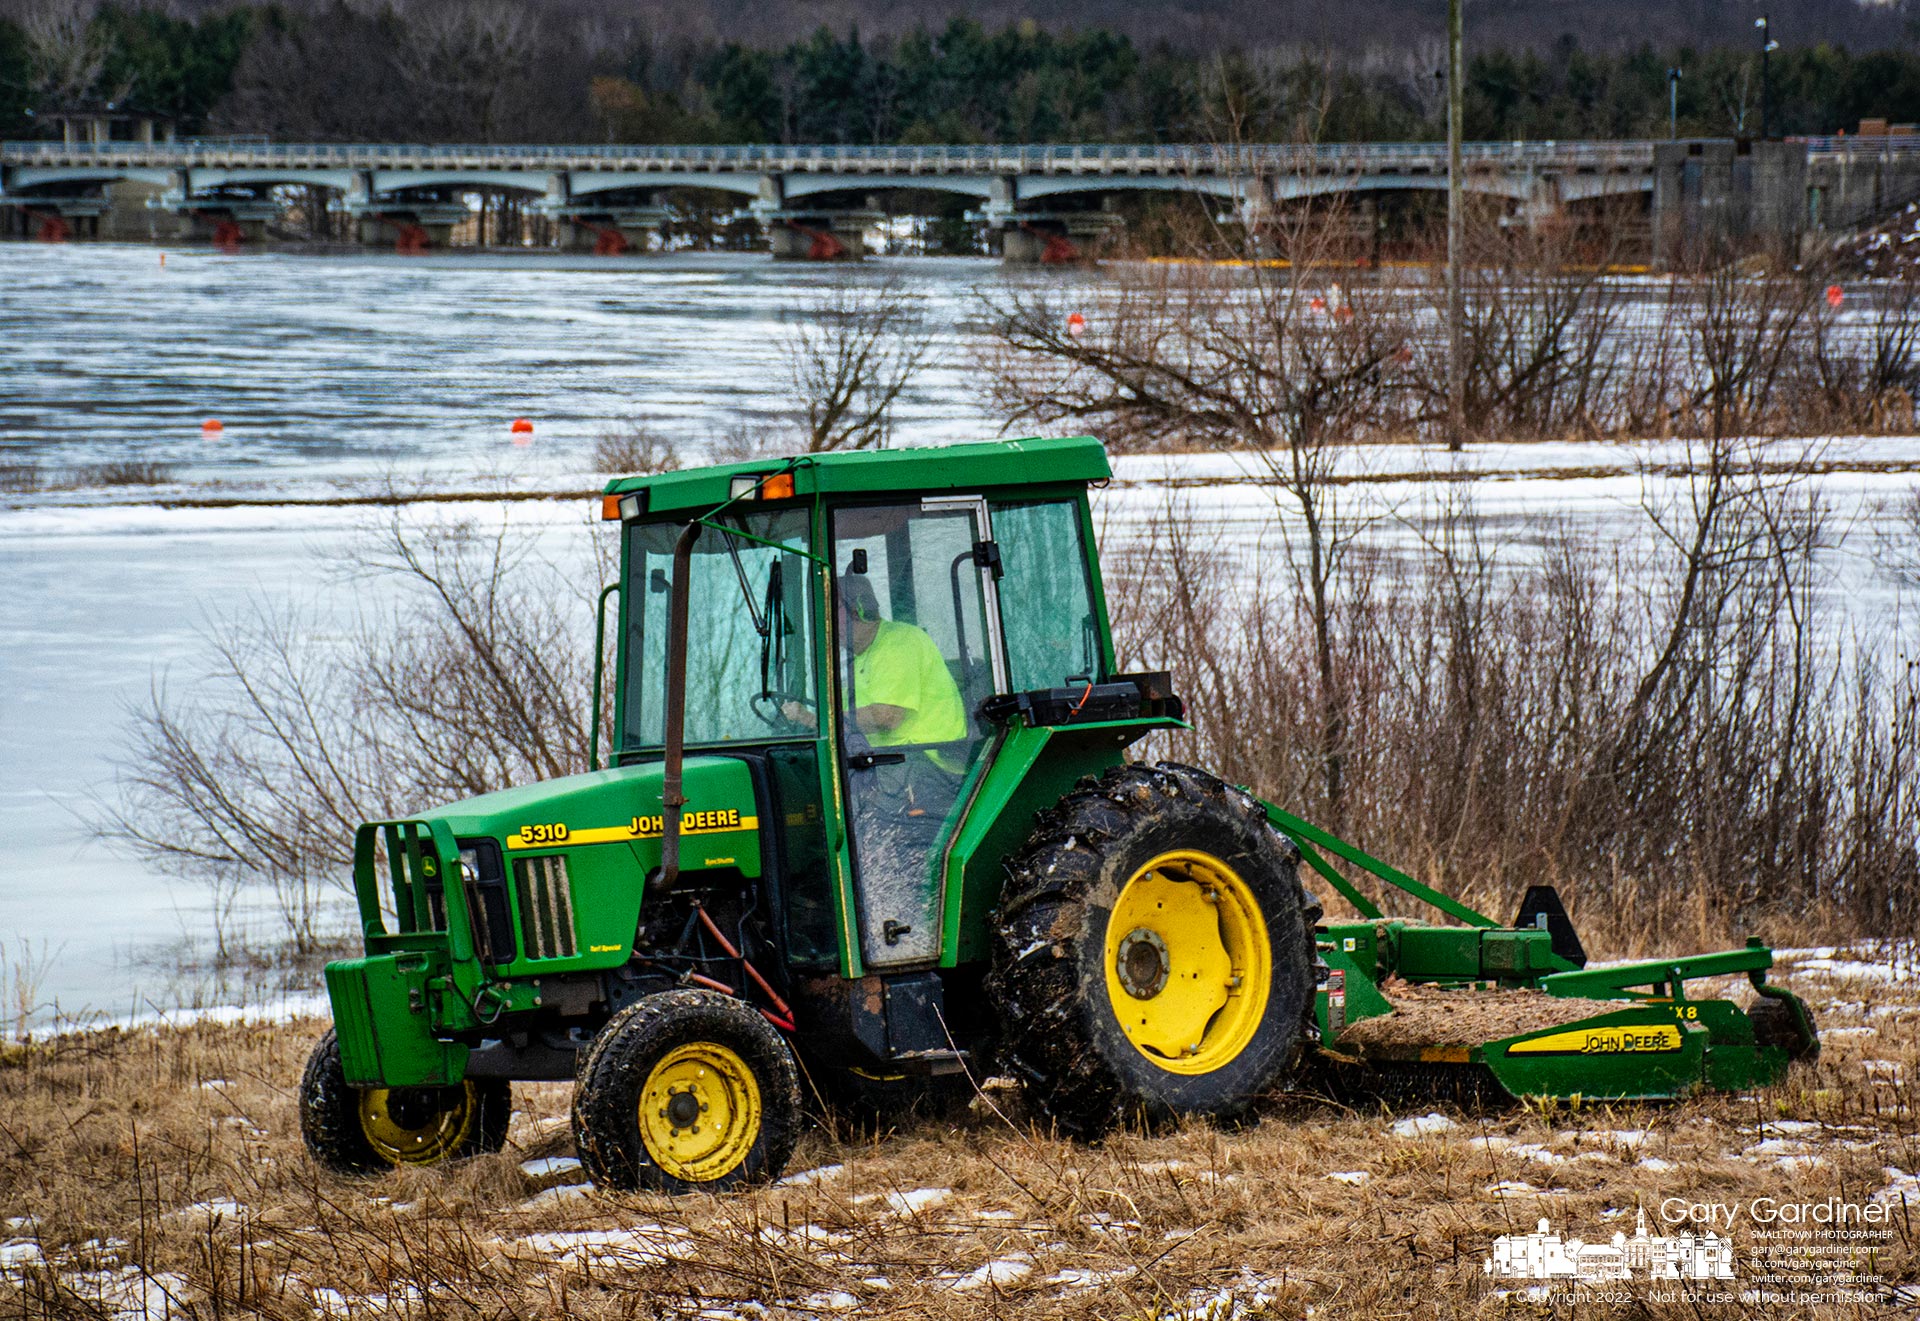 A work crew cuts the prairie grasses and plants along the shoreline of Hoover Reservoir near the dam completing a large portion of clearing dried vegetation from near the lake. My Final Photo for Feb. 11, 2022.